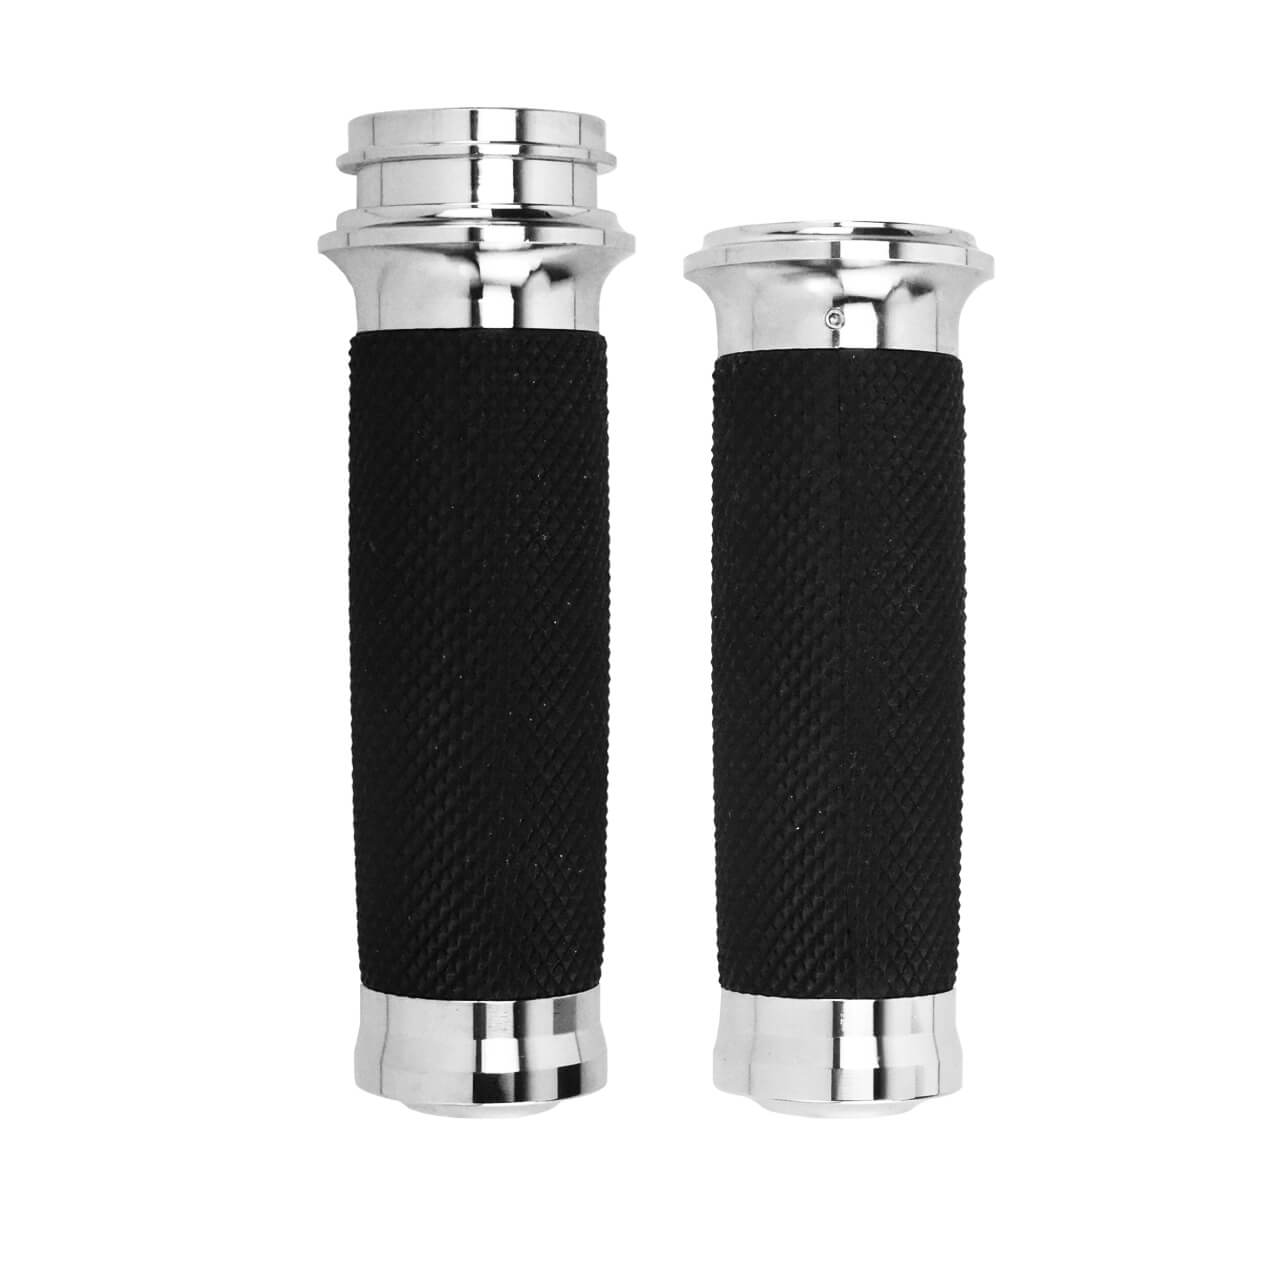 GP004704-Motorcycle-Chrome-Electronic-Hand-Grips